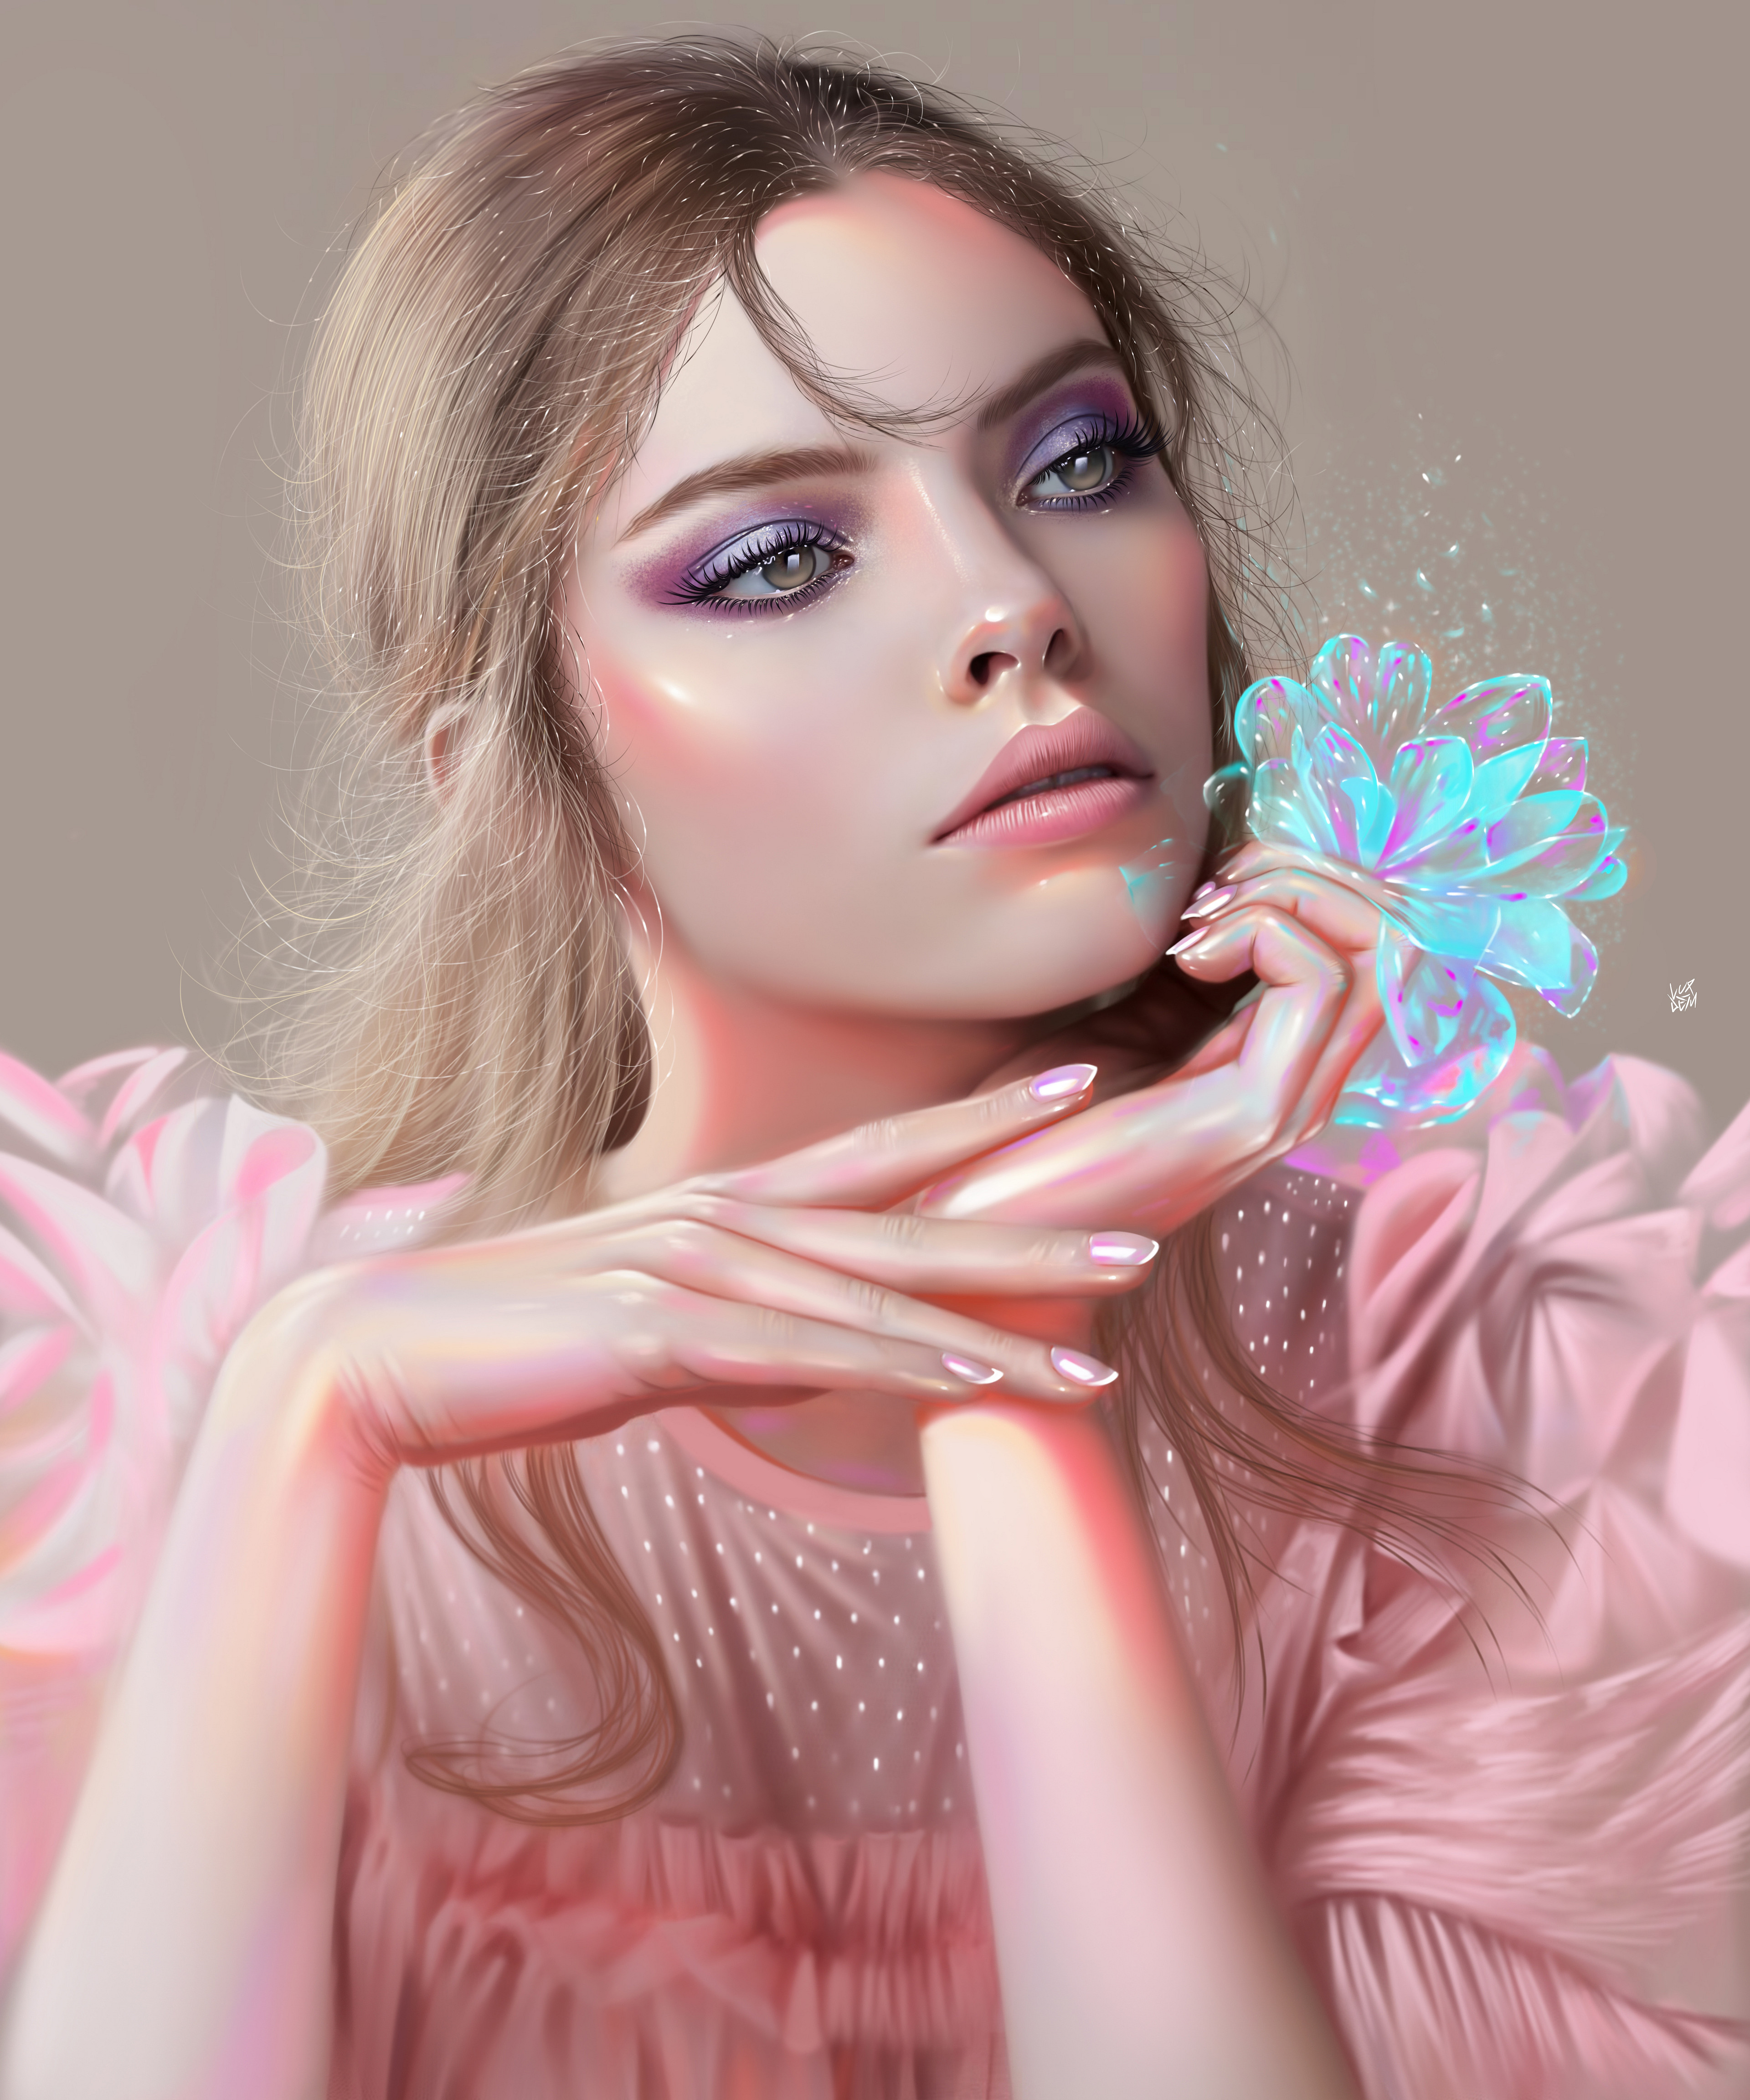 Women Young Woman Looking Away Digital Art Digital Painting Pink Dress Pink Clothing Looking At The  3840x4608